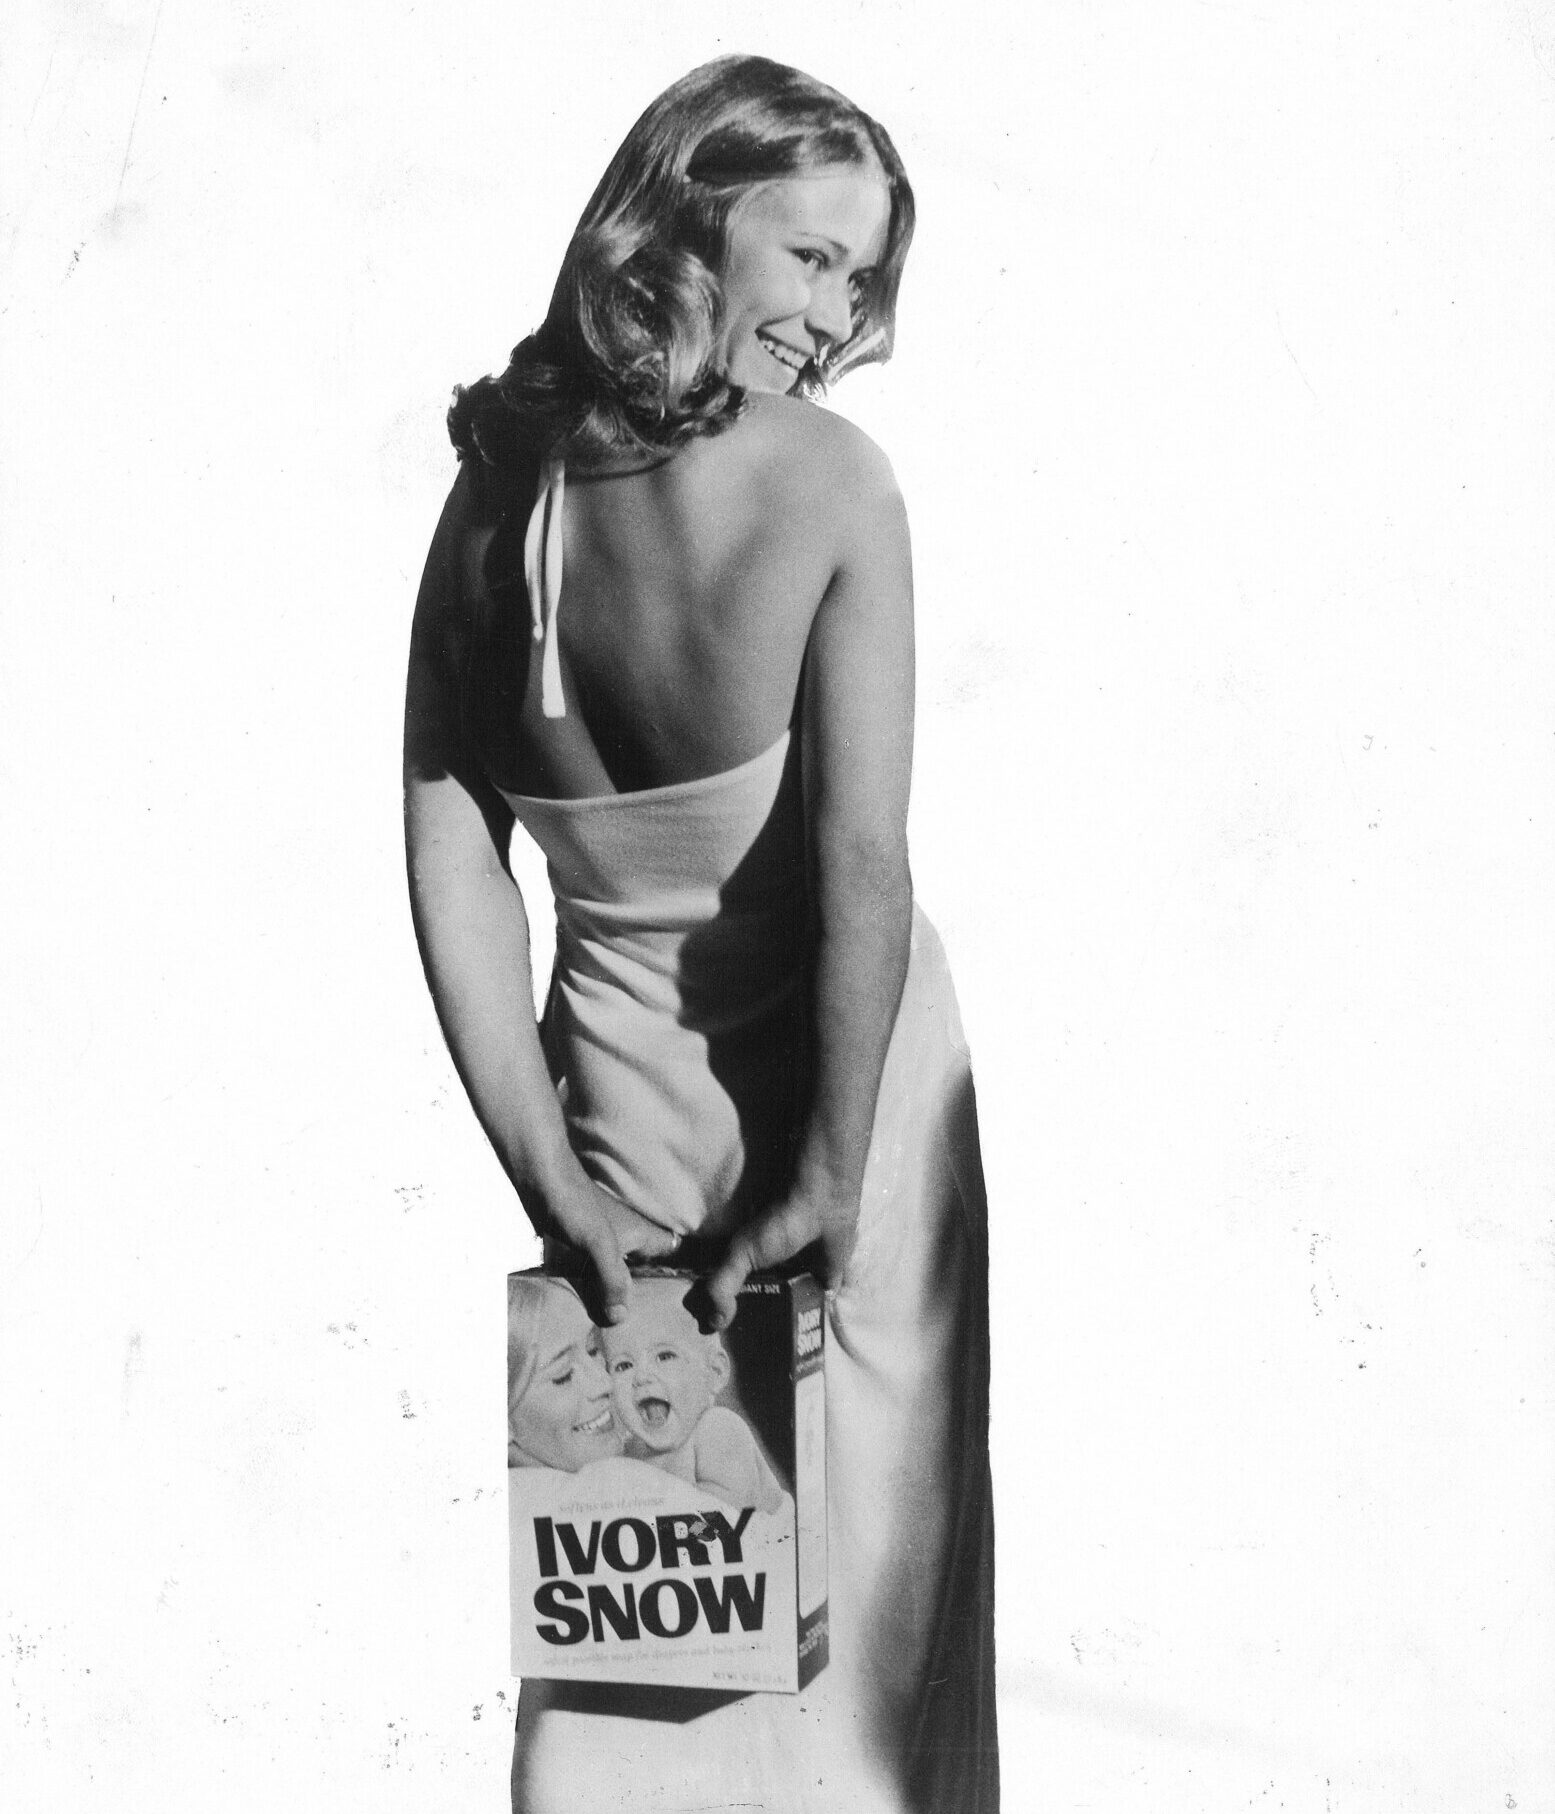 A young Marilyn Chambers poses with a box of Ivory Snow detergent.